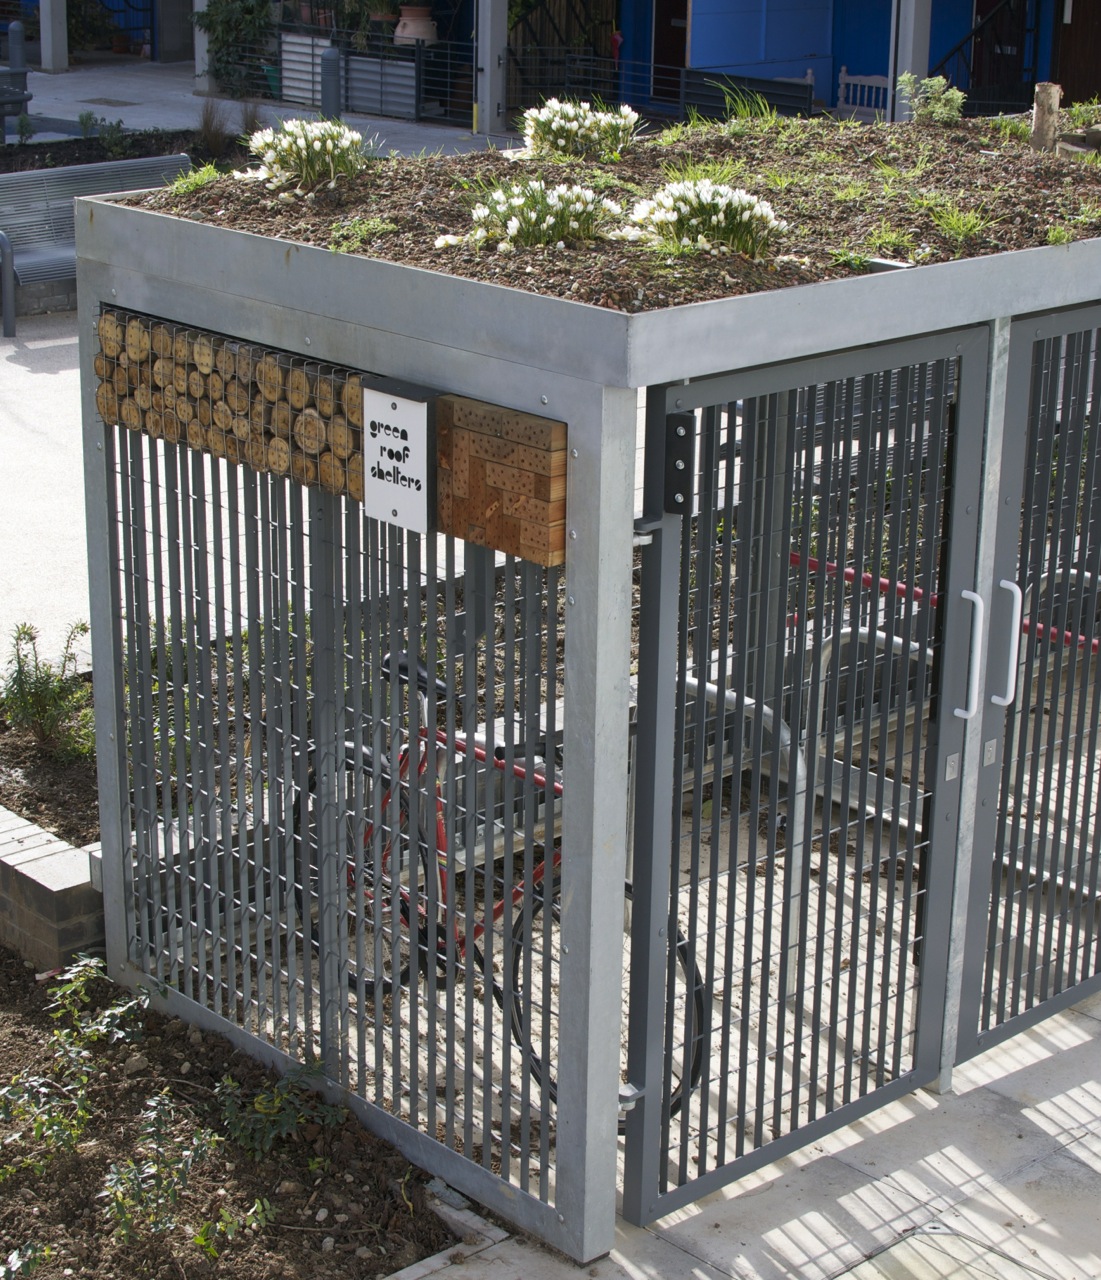 a bike shed should have a green roof - small scale green